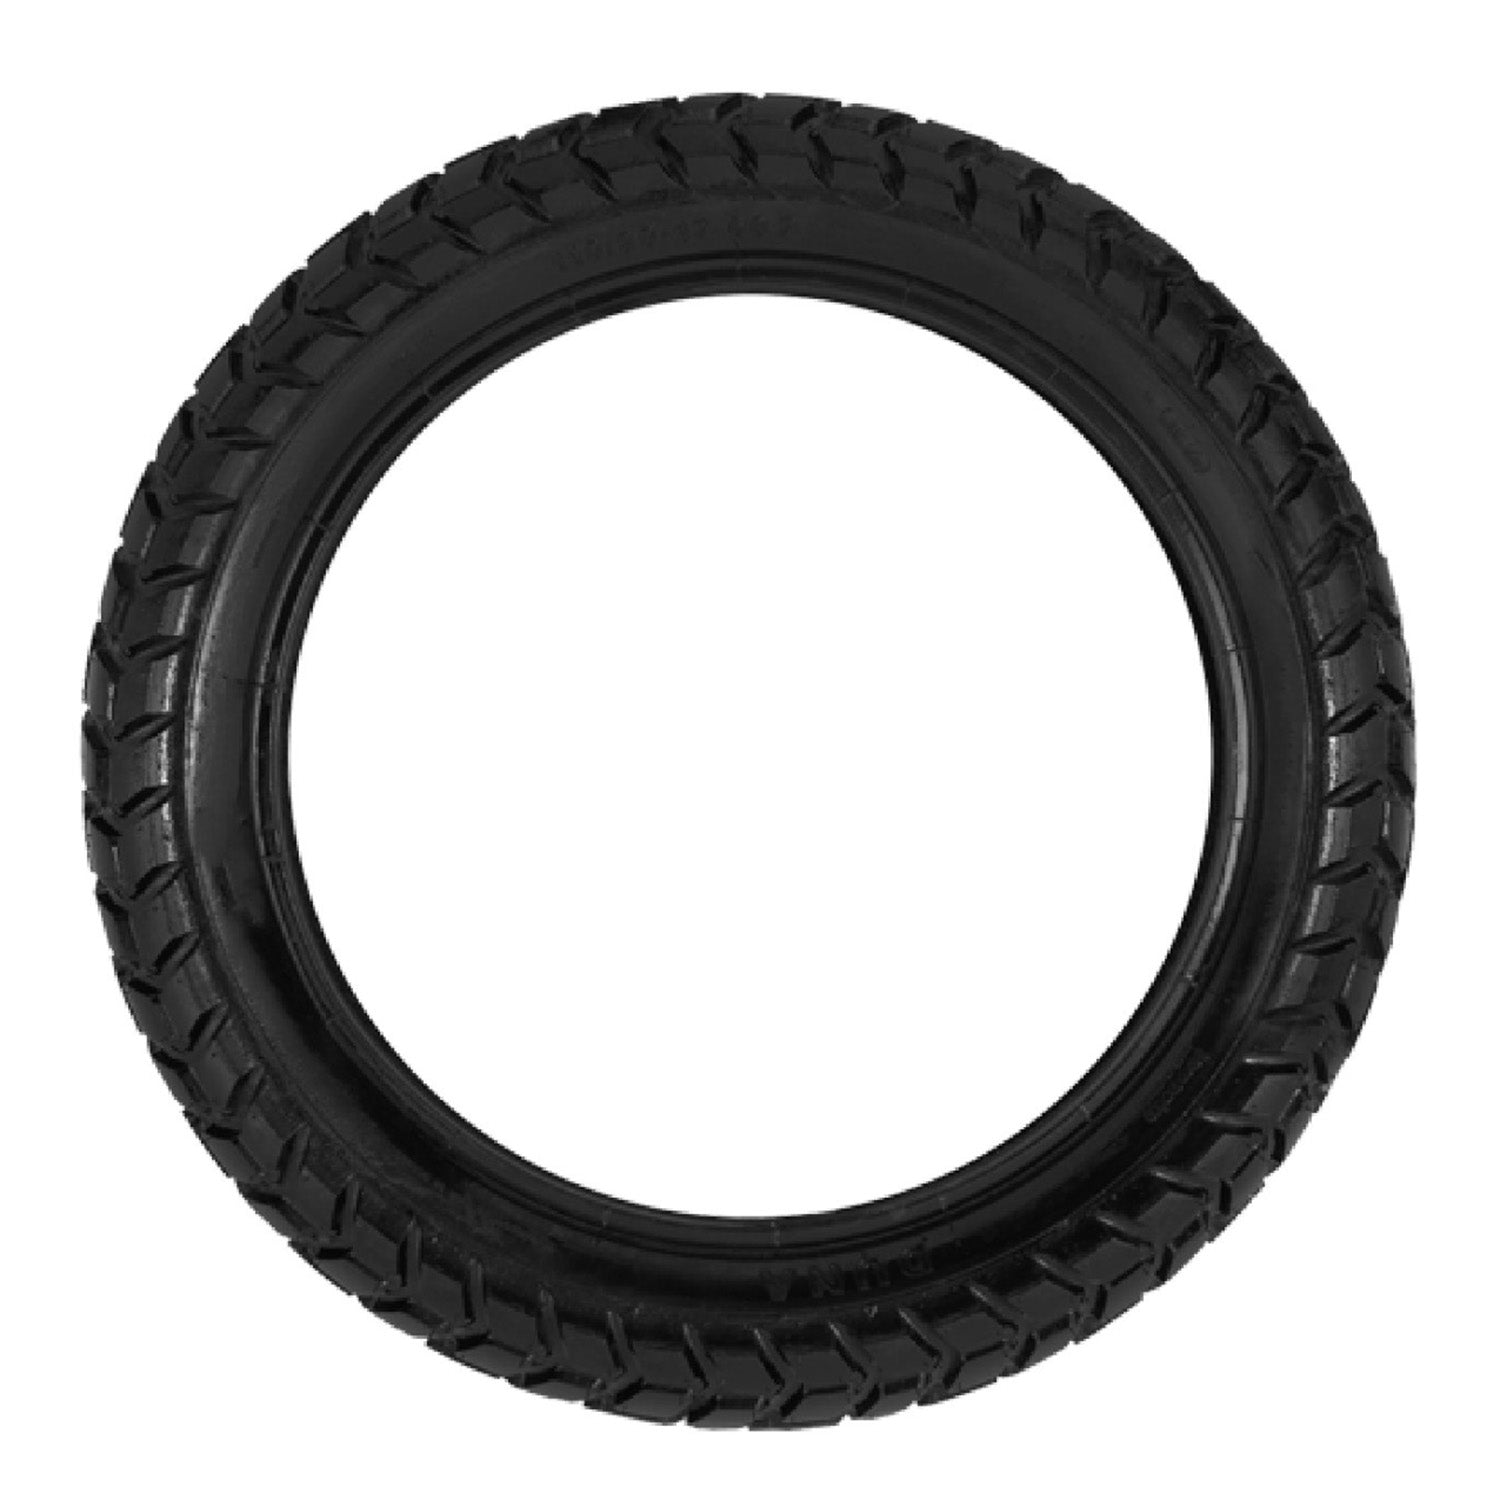 Electric Scooter Tires - GOTRAX